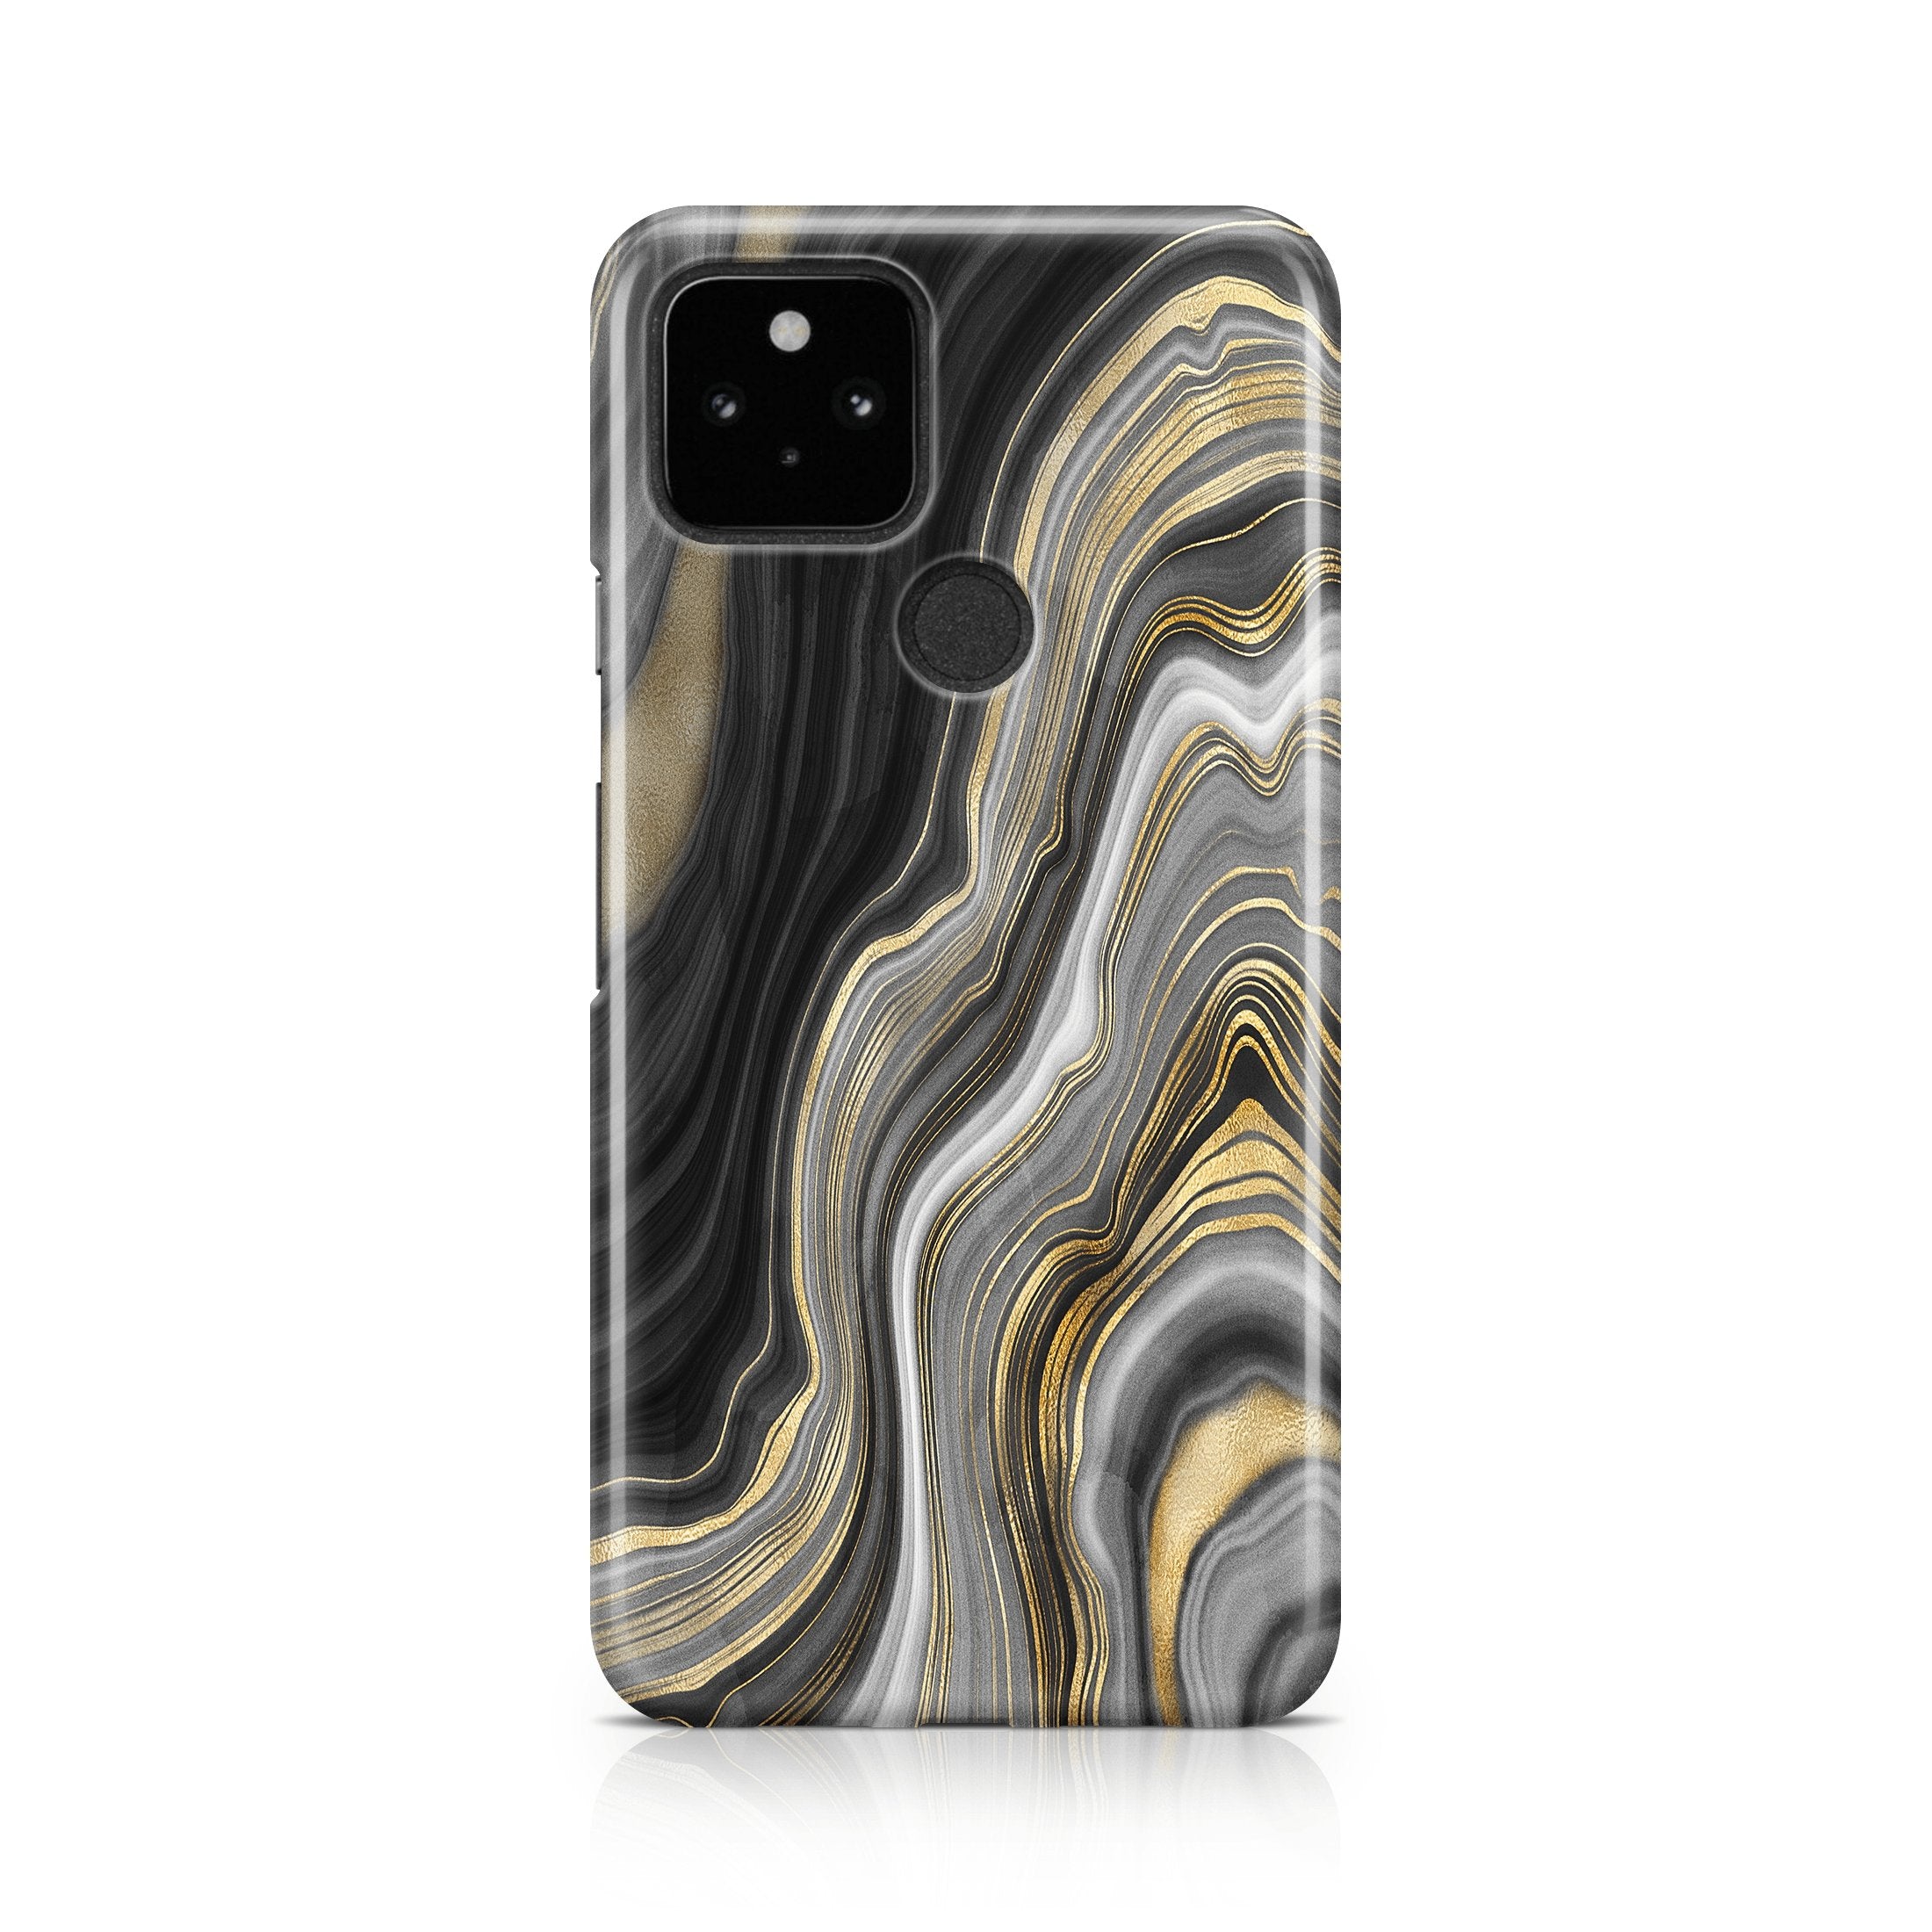 Black & Gold Agate I - Google phone case designs by CaseSwagger